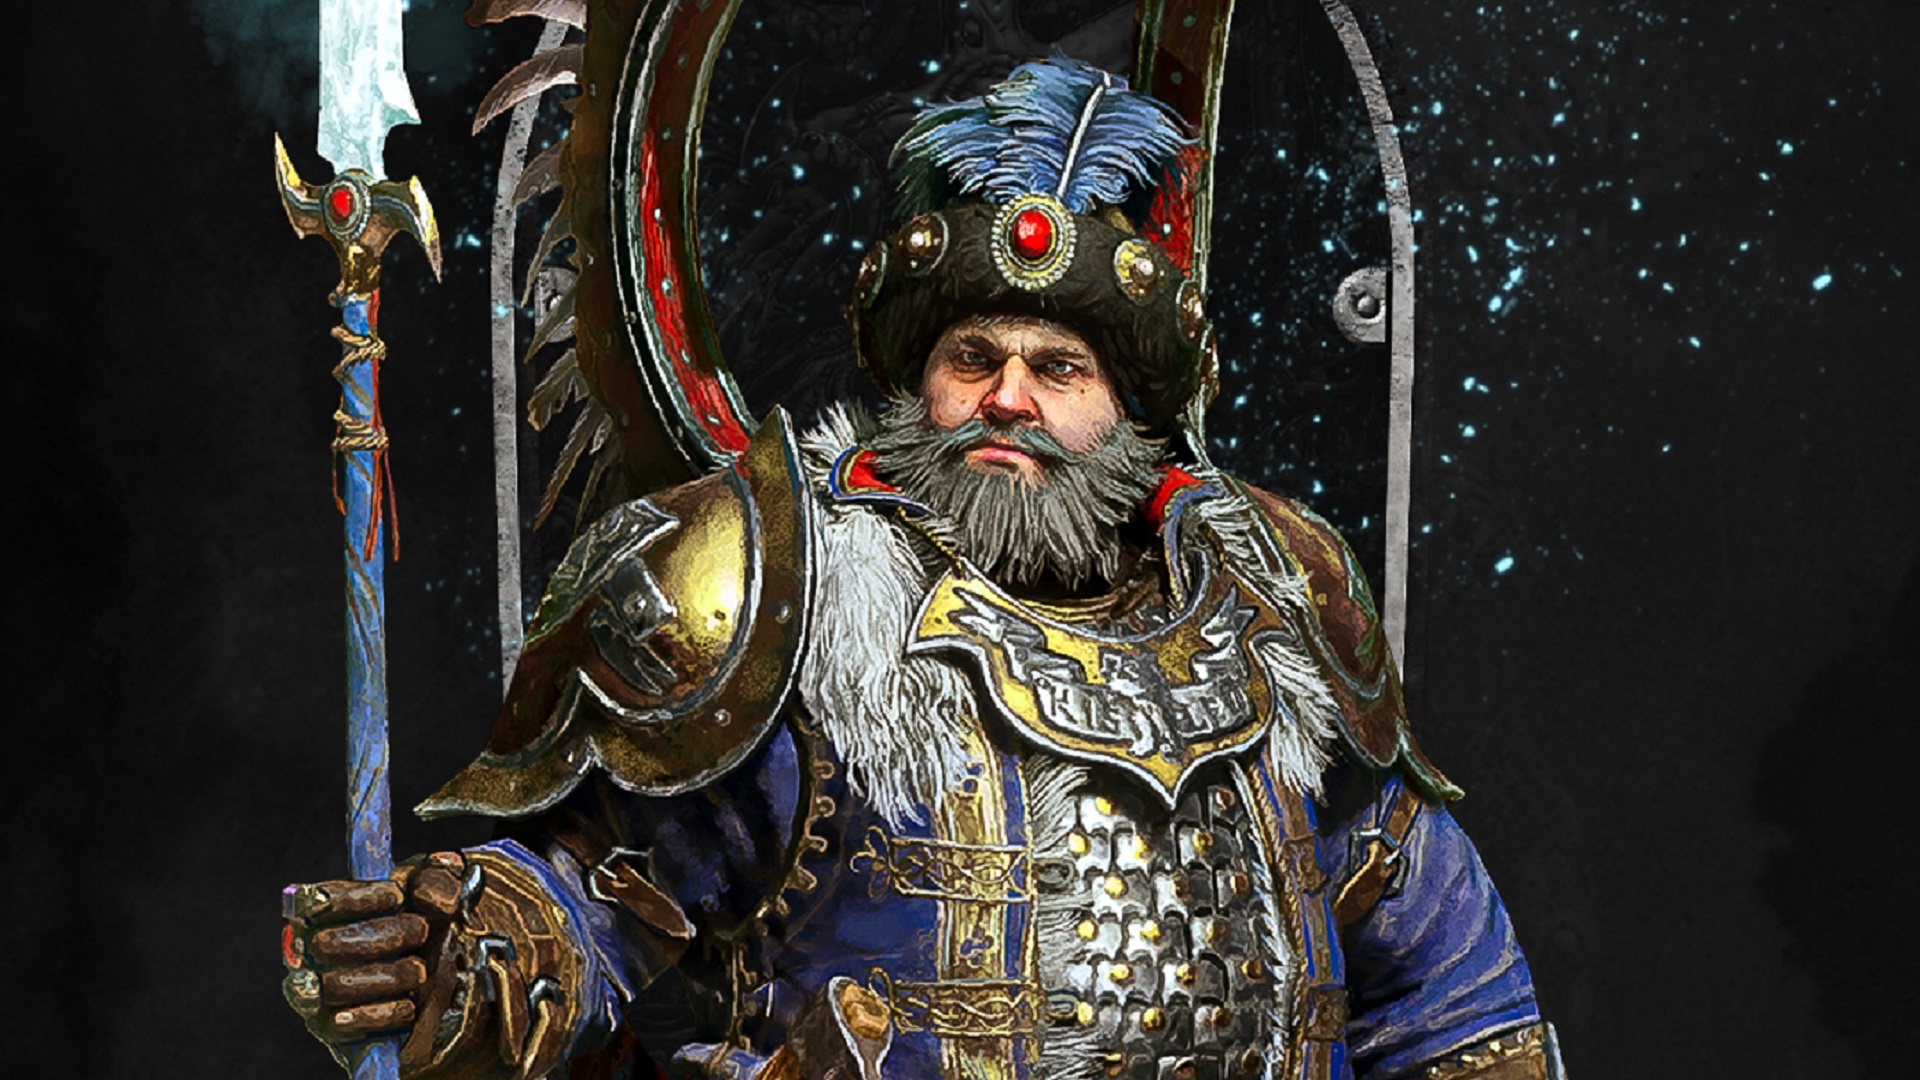 This Total Warhammer 3 Immortal Empires mod adds lots of landmark lore